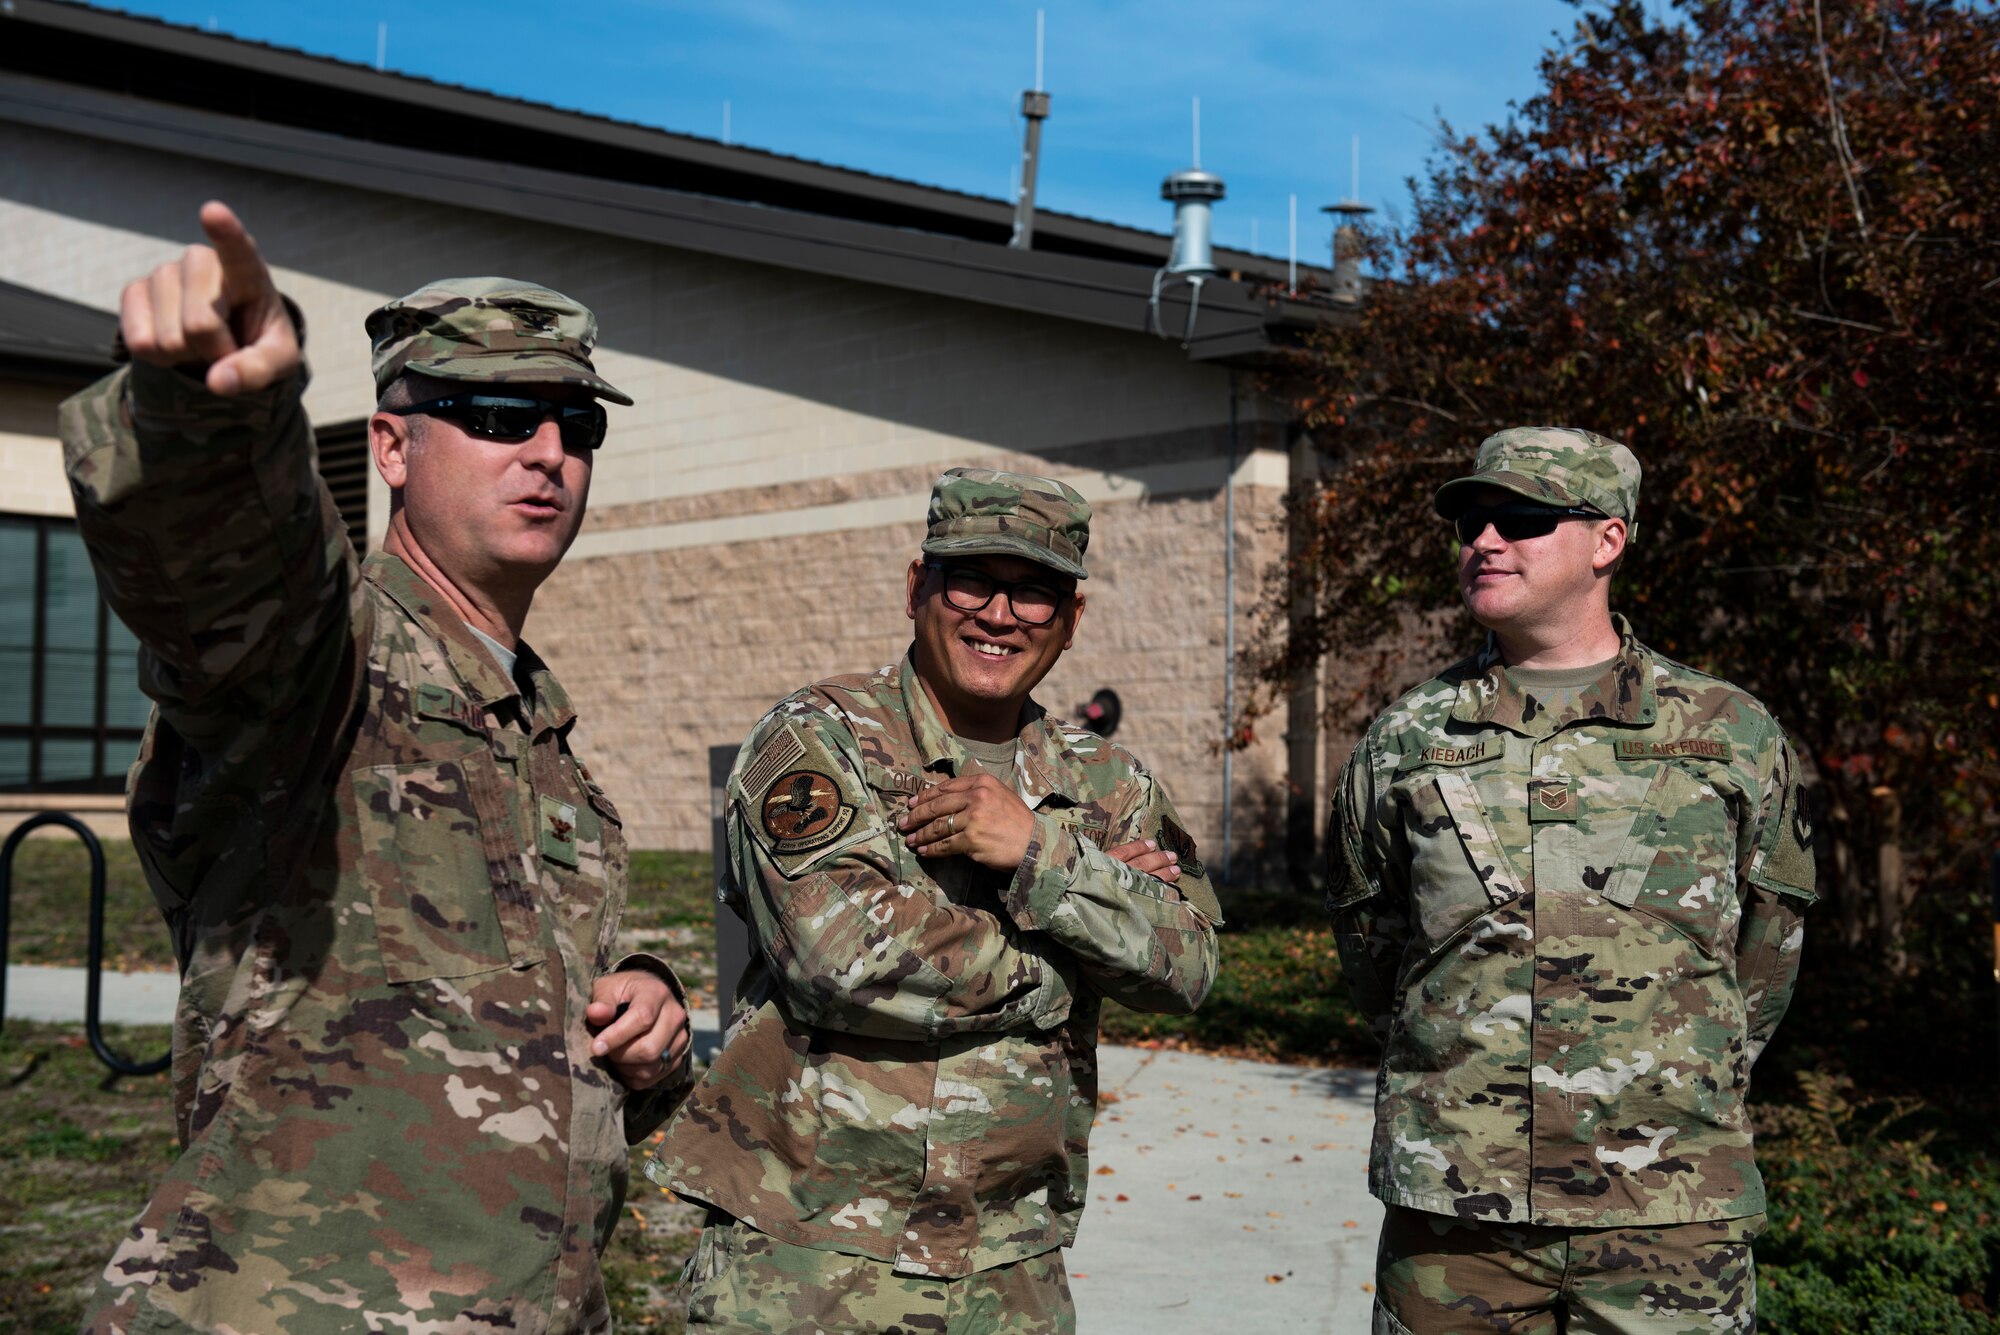 U.S. Air Force Col. Brian Laidlaw, 325th Fighter Wing commander, left, points toward a location with U.S. Air Force Tech. Sgt. Richard Oliver, 325th Operations Support Squadron Radar, Airfield, and Weather Systems noncommissioned officer in charge, center, and U.S. Air Force Staff Sgt. Christopher Kiebach, 325th OSS RAWS supervisor at Tyndall Air Force Base, Florida, Nov. 26, 2019. Kiebach had been selected by the 325th Operations Group to showcase his duty specialty to the wing commander as part of the wing's Airman Shadow program. (U.S. Air Force photo by Staff Sgt. Magen M. Reeves)